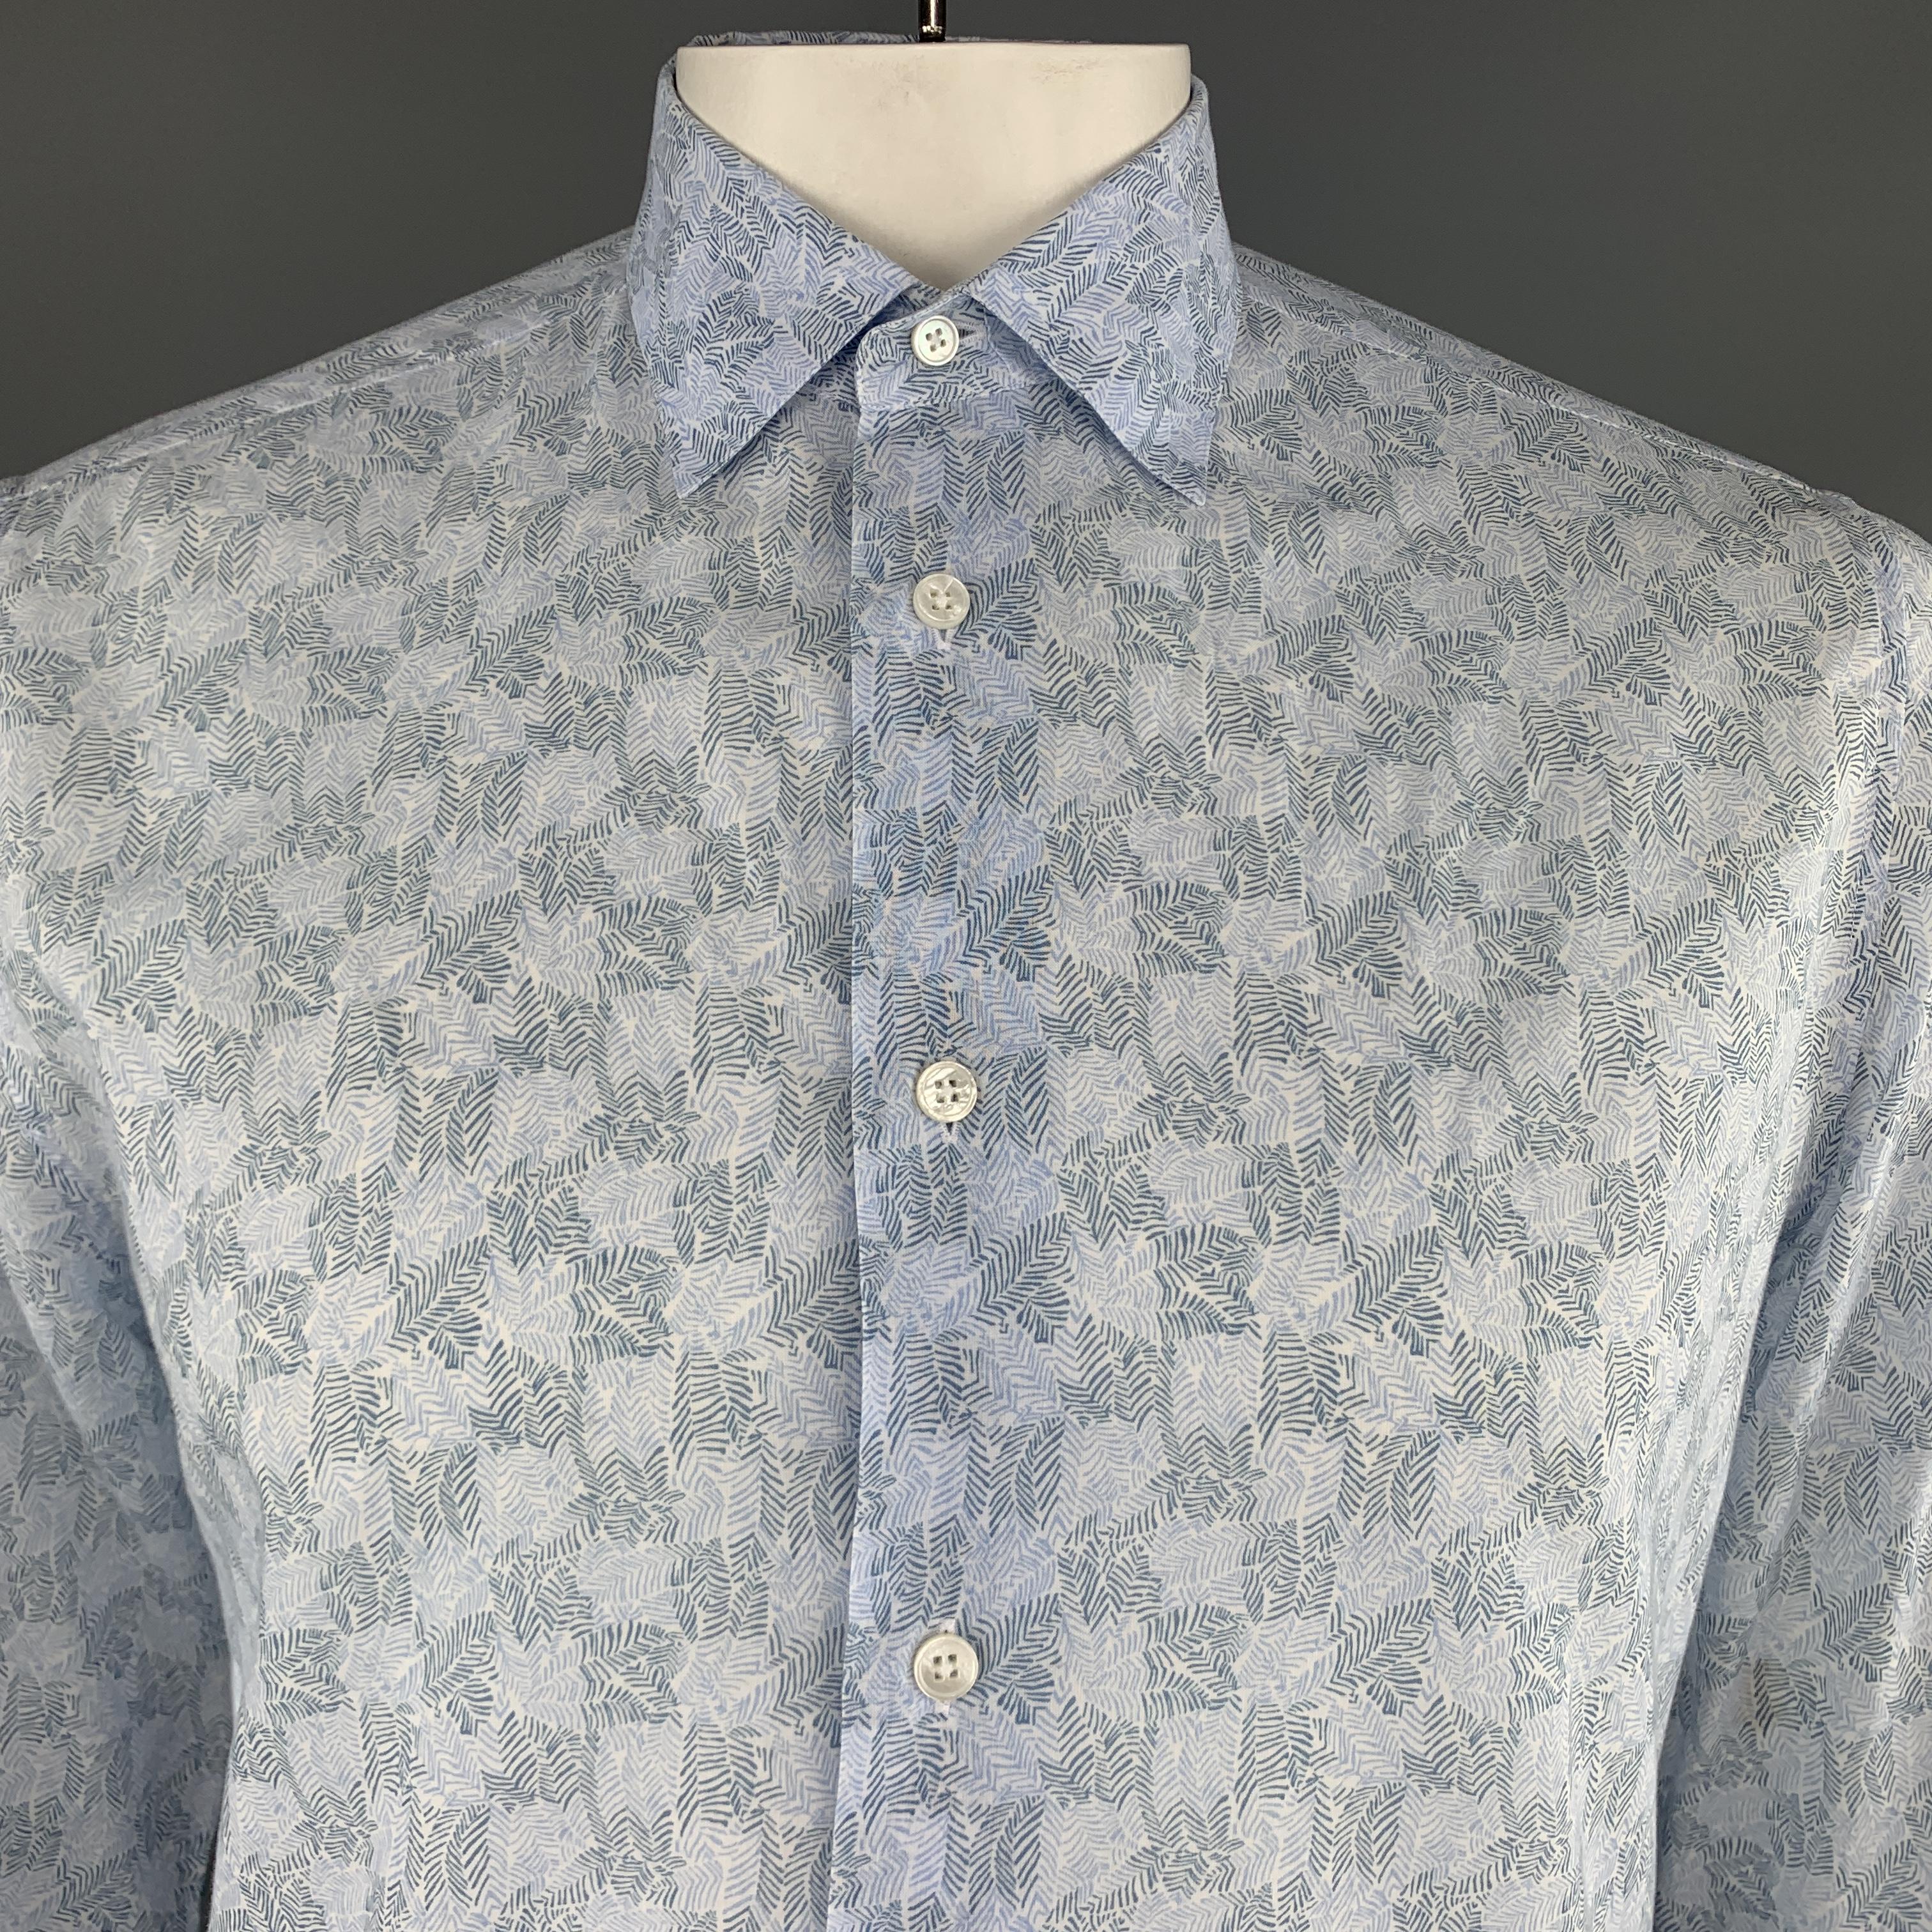 LOUIS VUITTON shirt comes in light blue leaf print cotton with a pointed collar and rolled tab button sleeve. Made in Italy.

Excellent Pre-Owned Condition.
Marked:  L

Measurements:

Shoulder: 16 in.
Chest: 44 in.
Sleeve: 27 in.
Length: 29 in.